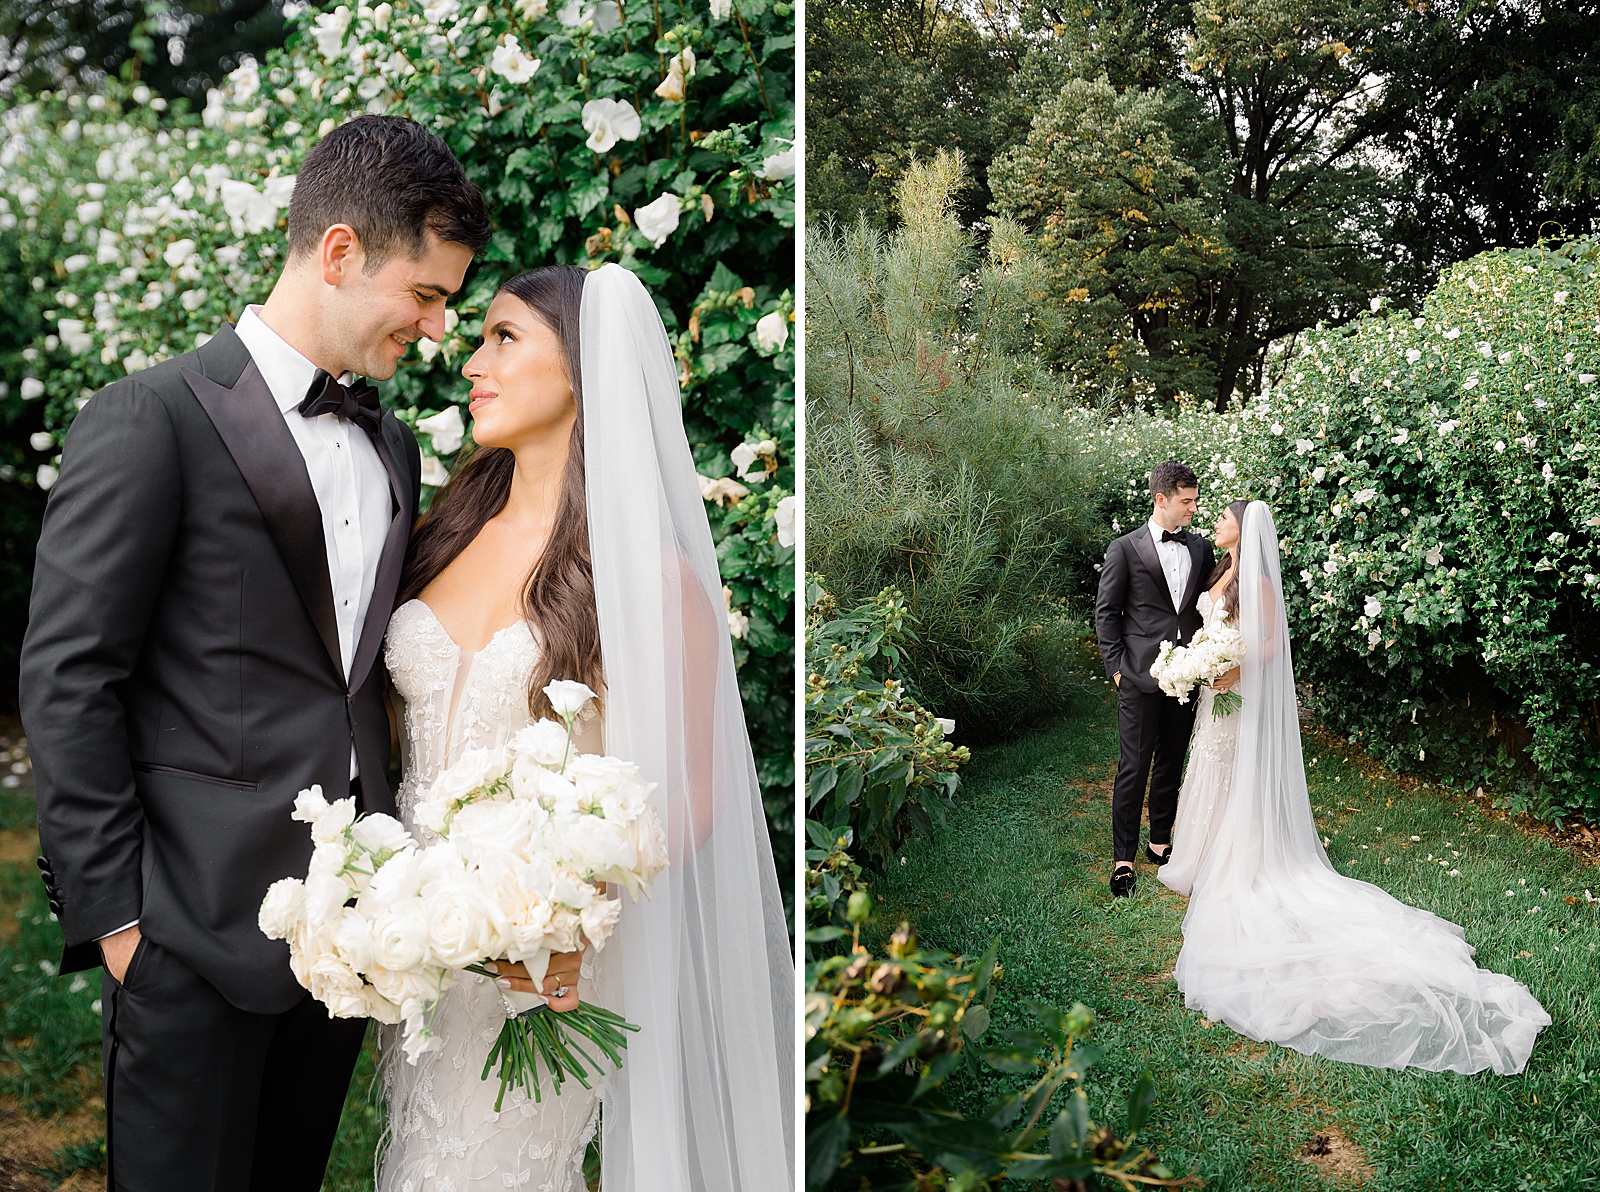 Left photo: Shot of the bride and groom smiling as they stare into each other's eyes. 
Right photo: Full body shot of the bride and groom smiling at each other next to a flower bush. 